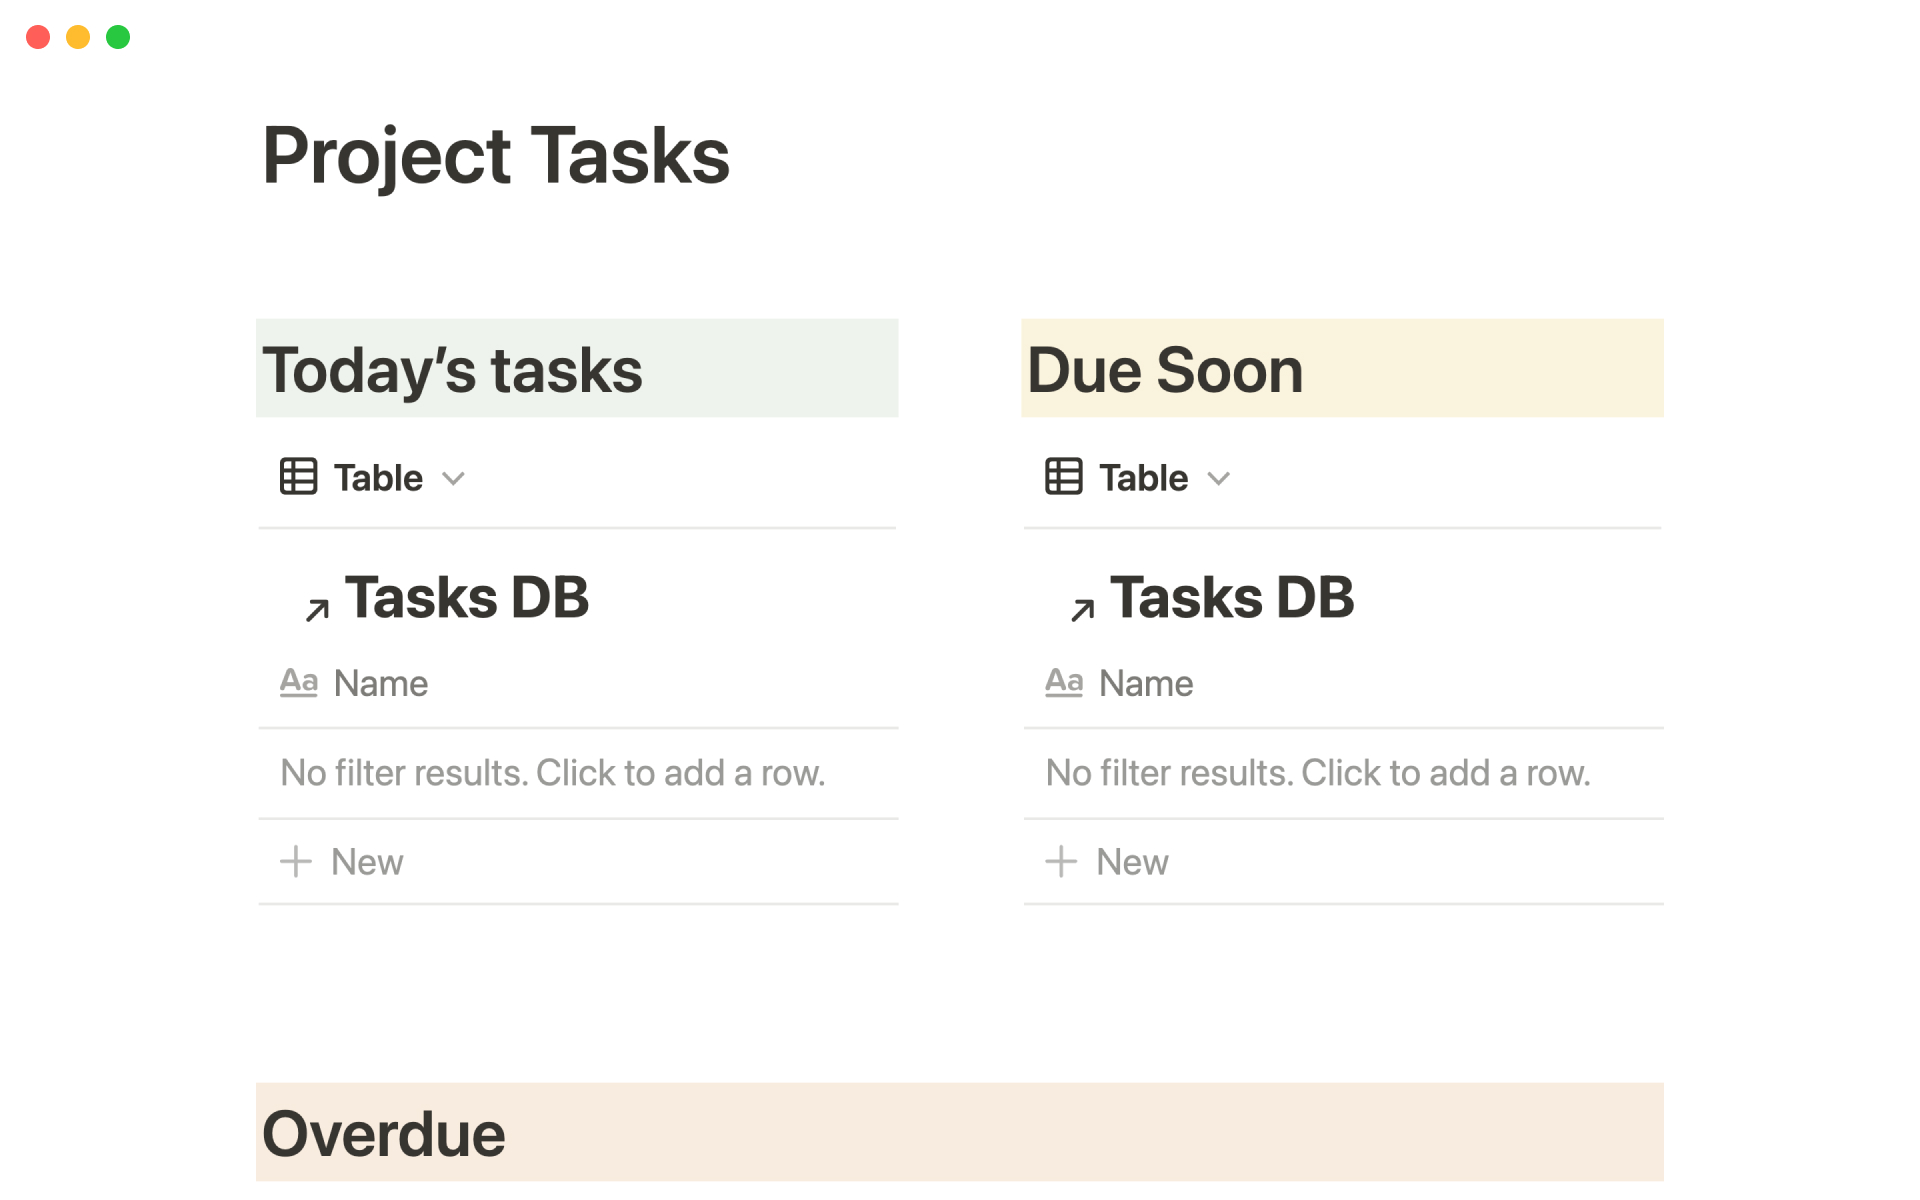 Create and manage projects across different teams.